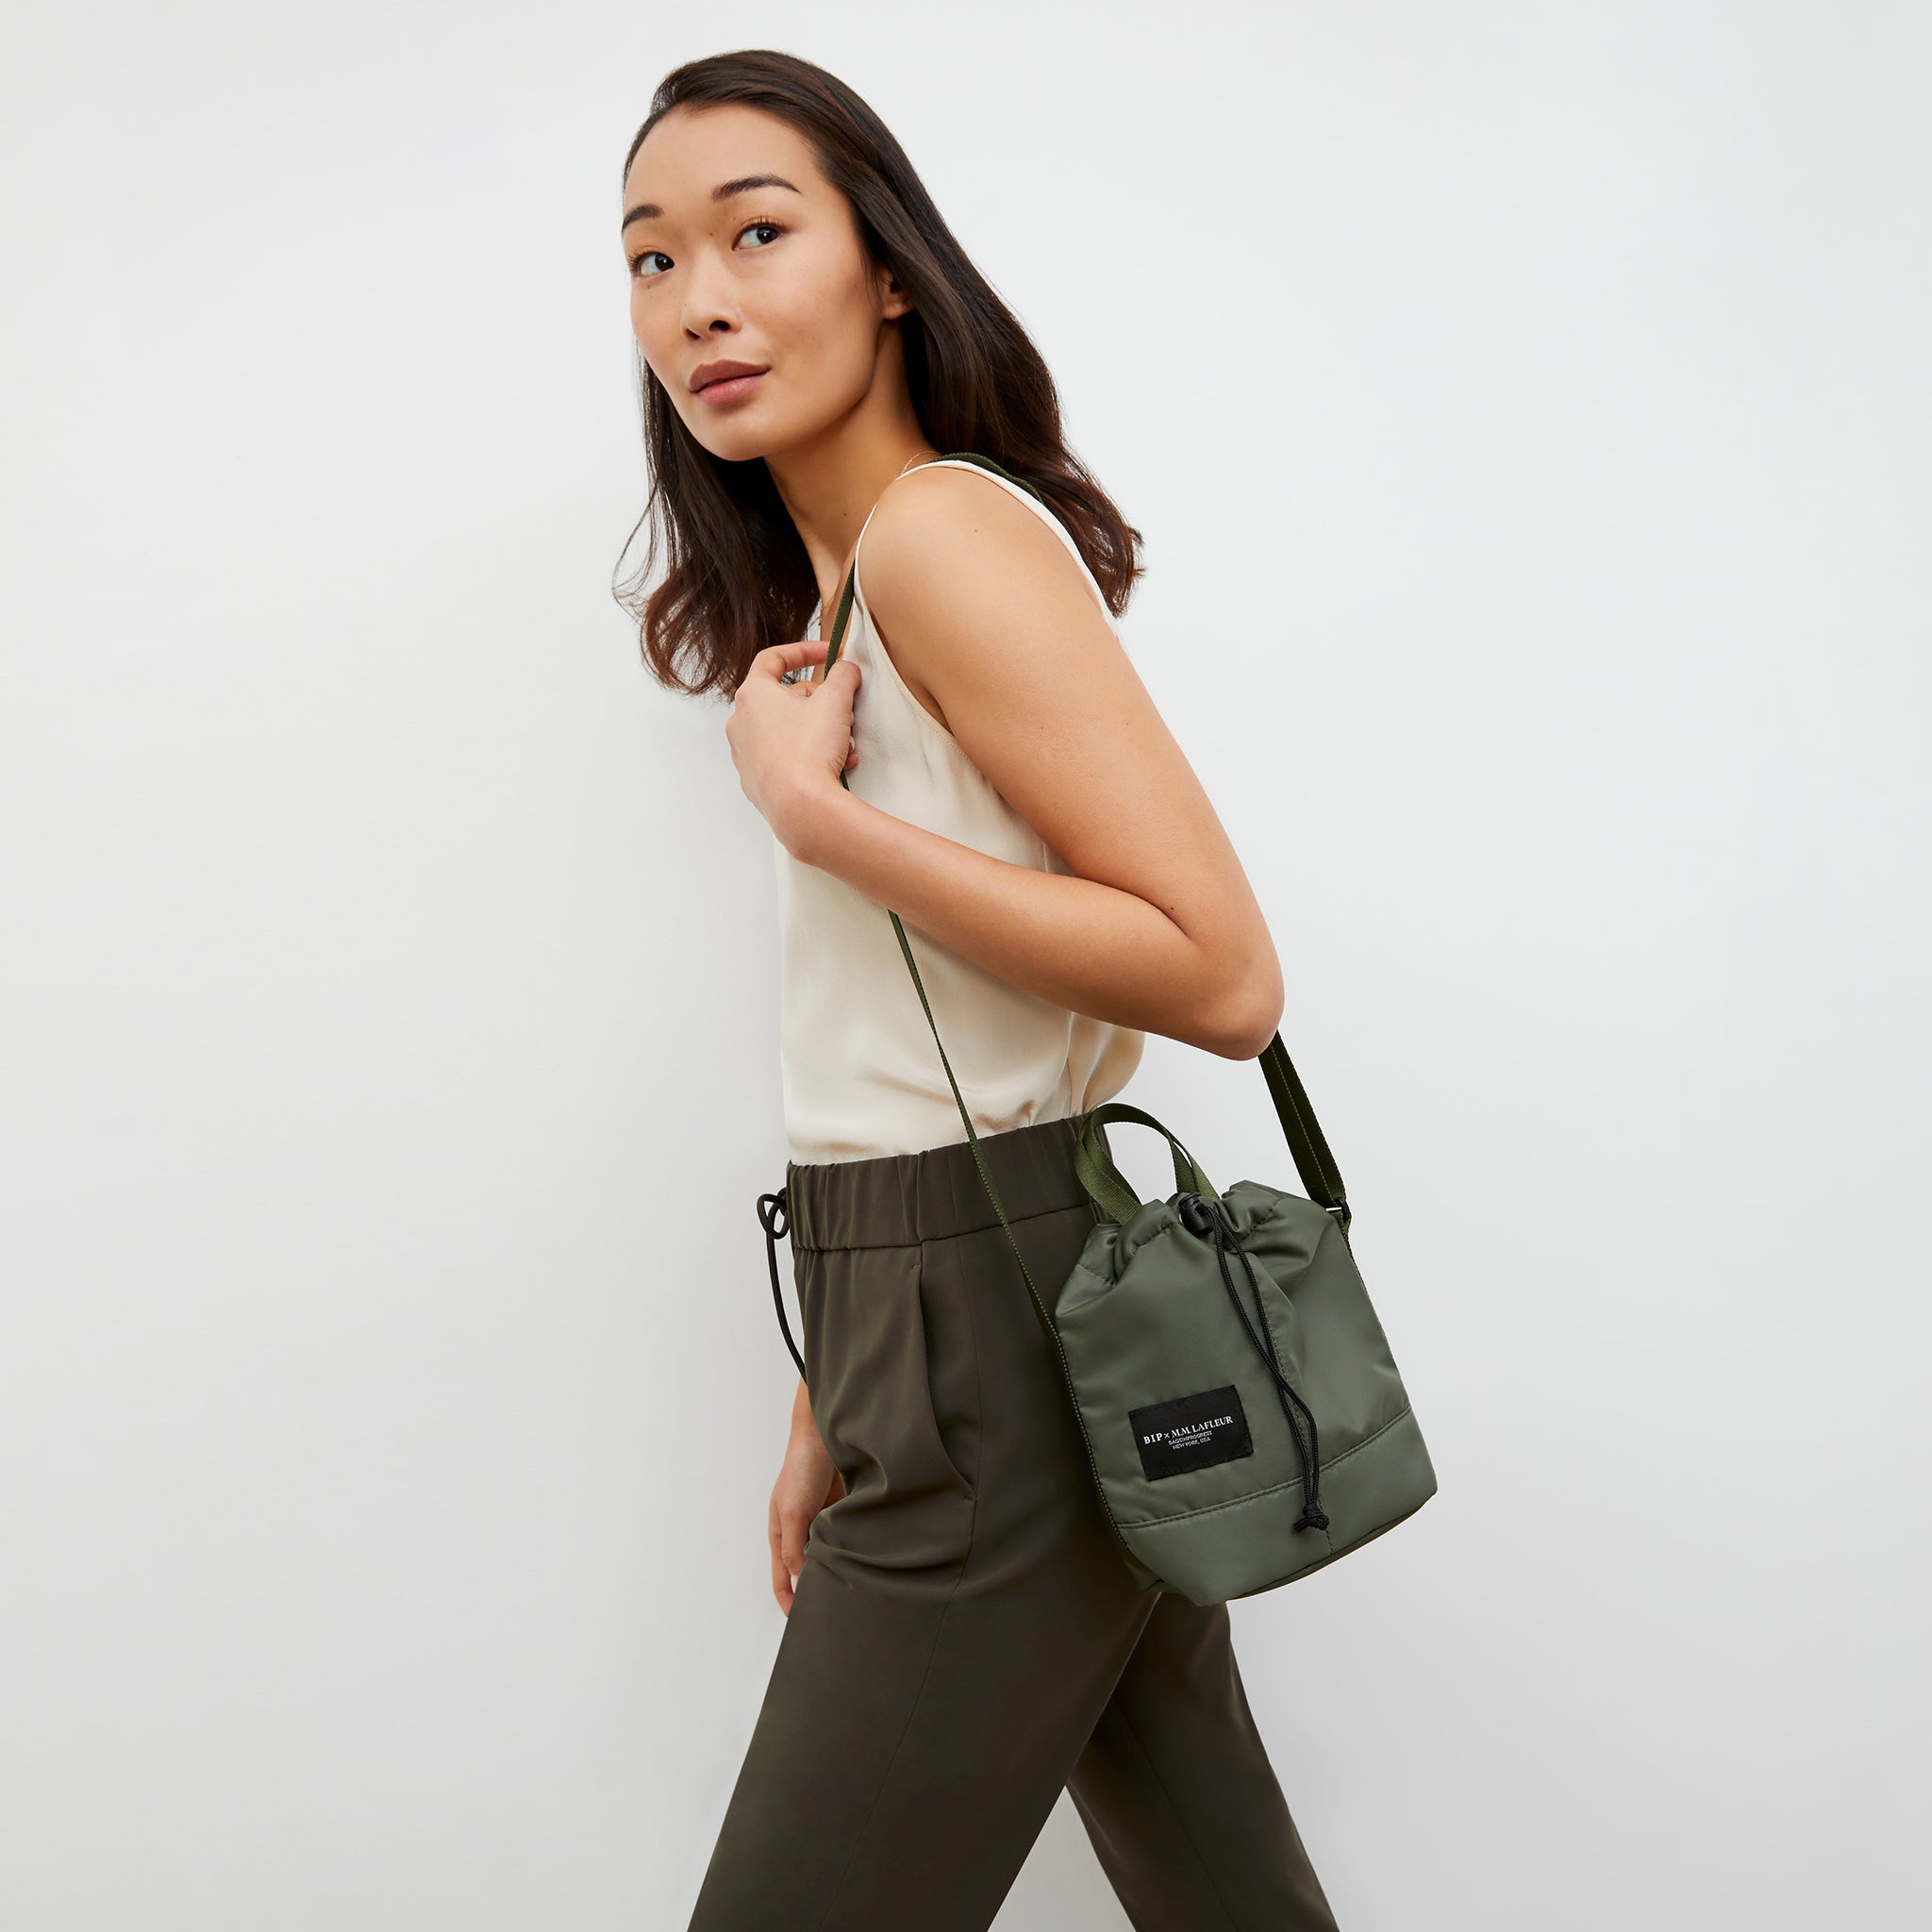 Front image of a woman wearing the Bags in Progress x MM Padded Mini Bucket Bag in Khaki Green